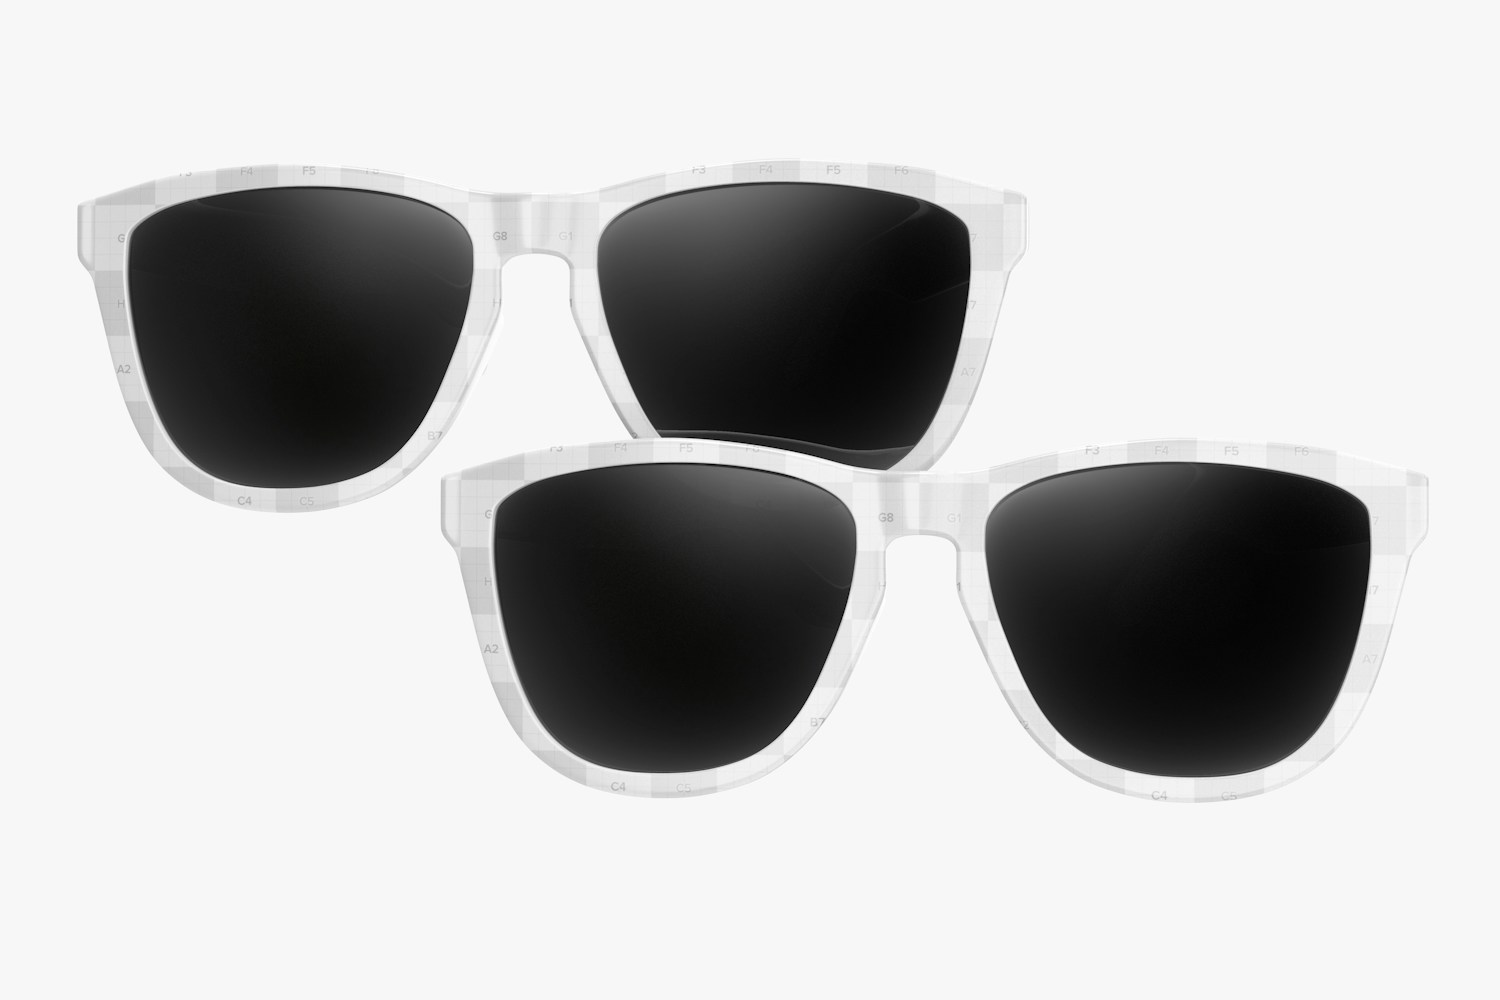 Sunglasses Mockup, Front View